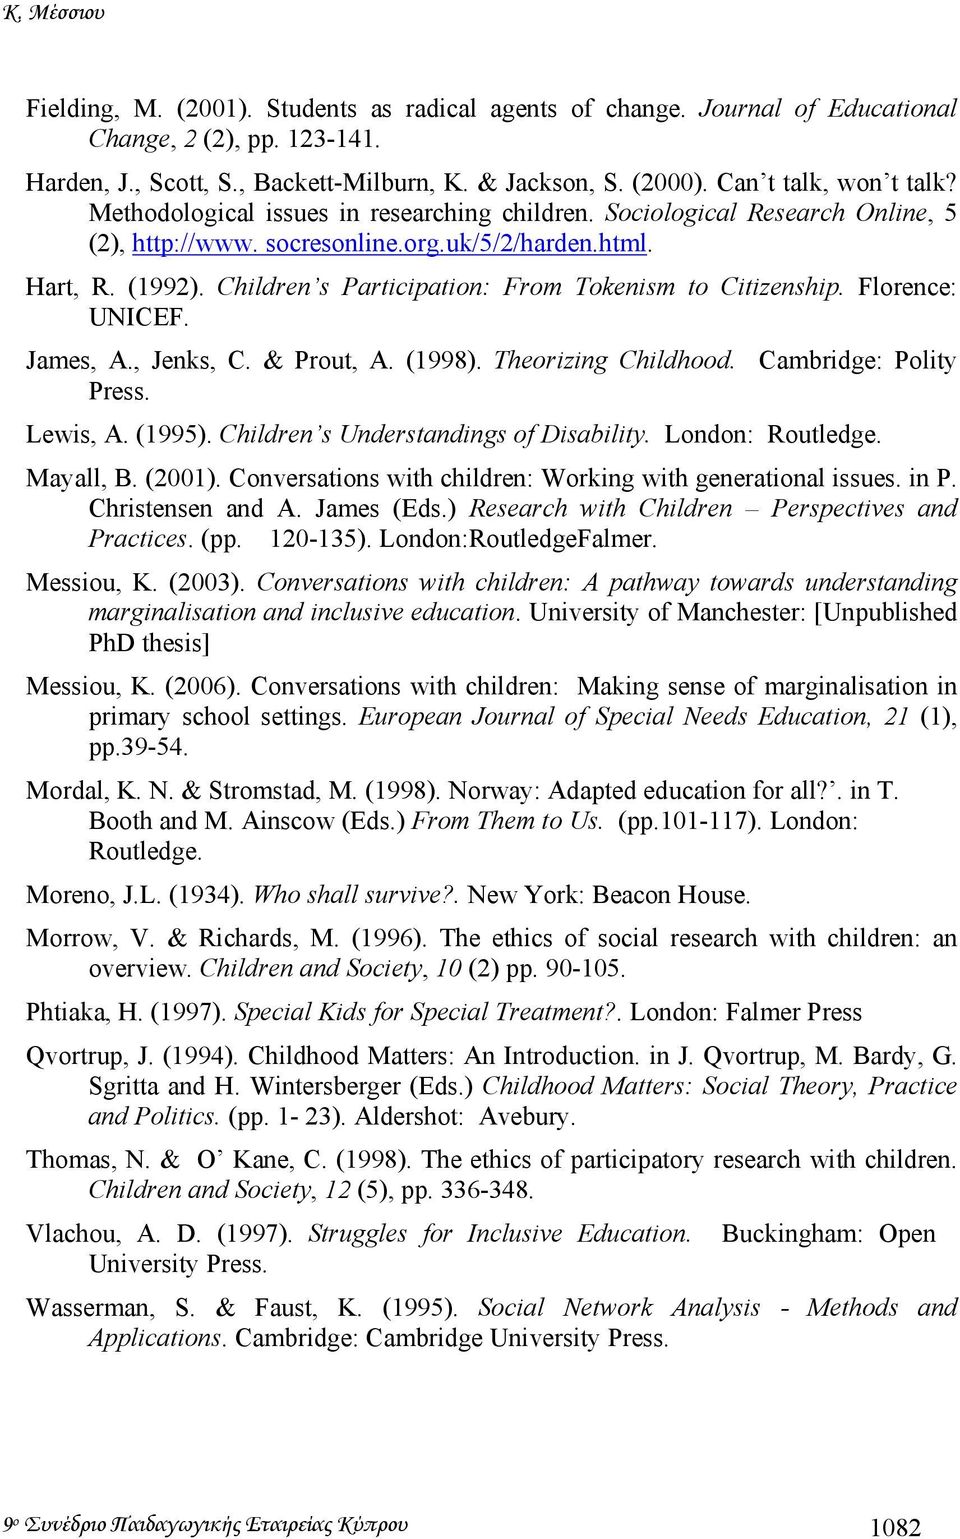 Children s Participation: From Tokenism to Citizenship. Florence: UNICEF. James, A., Jenks, C. & Prout, A. (1998). Theorizing Childhood. Cambridge: Polity Press. Lewis, A. (1995).